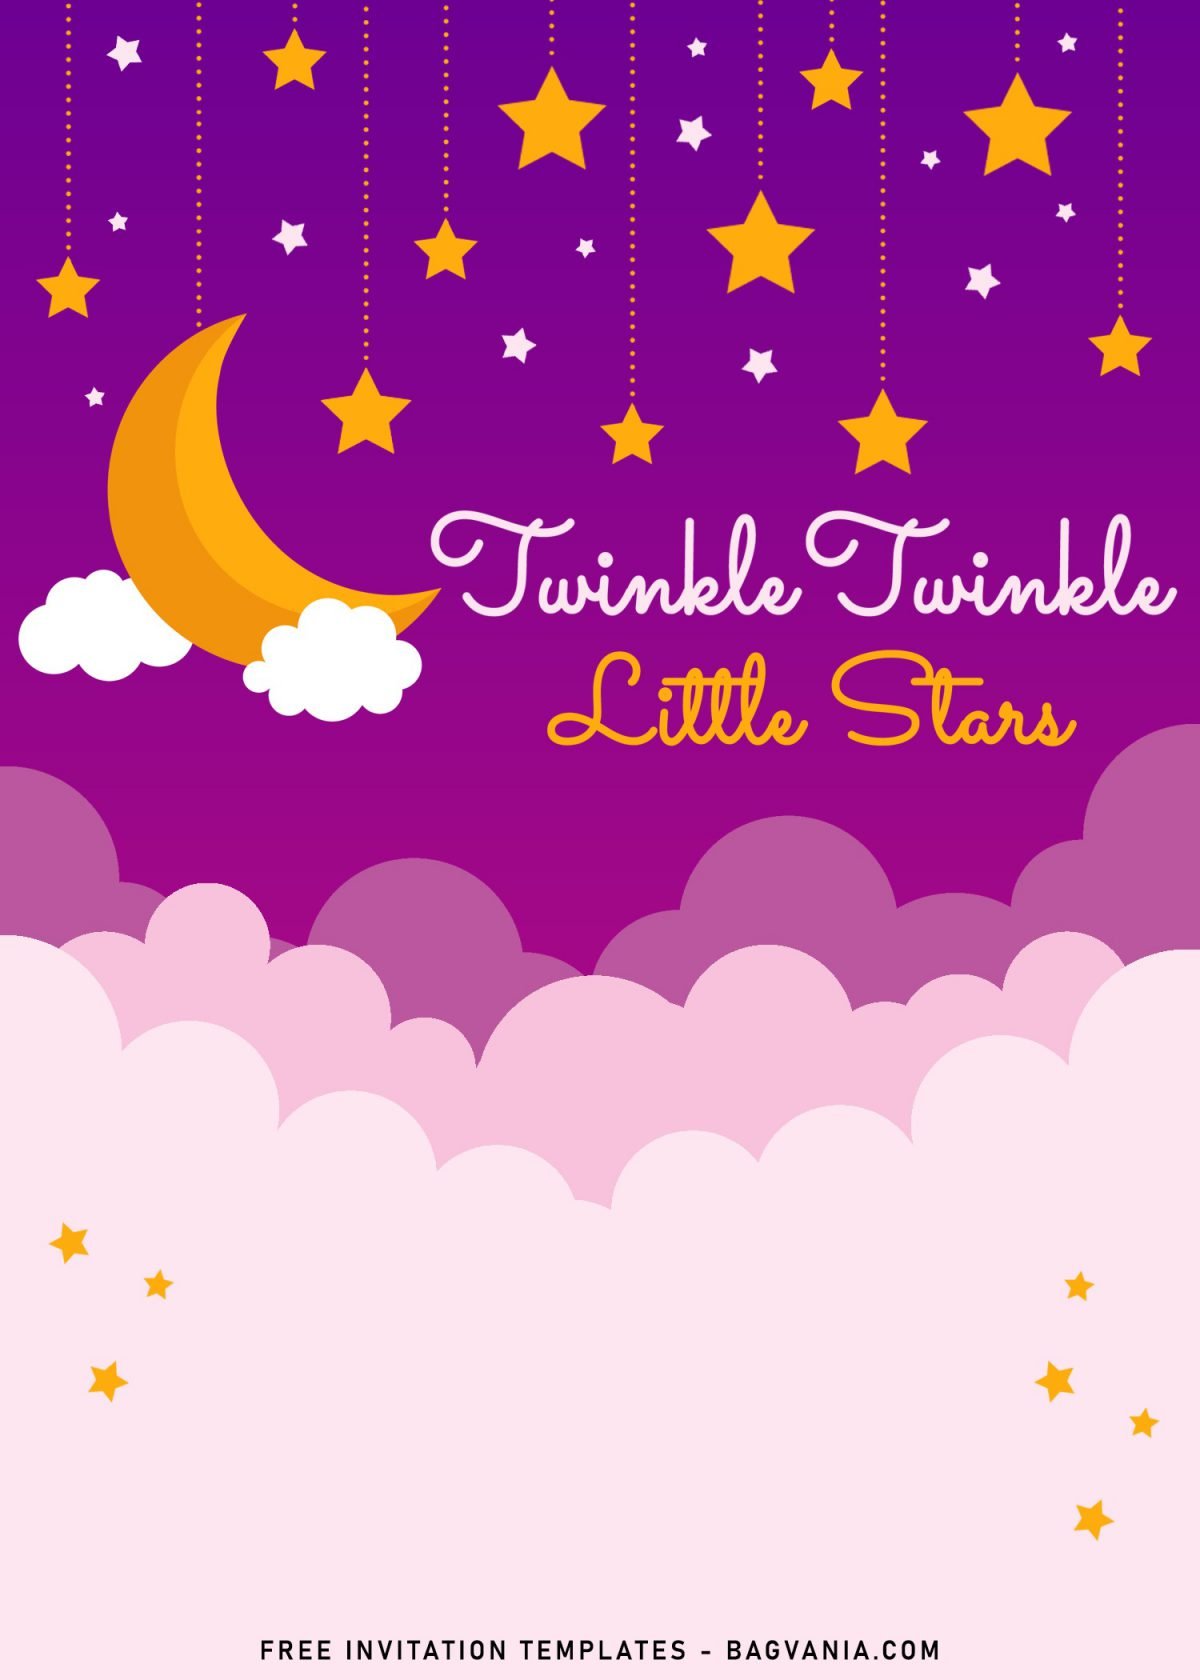 10+ Twinkle Twinkle Little Star Birthday Invitation Templates and has cute design